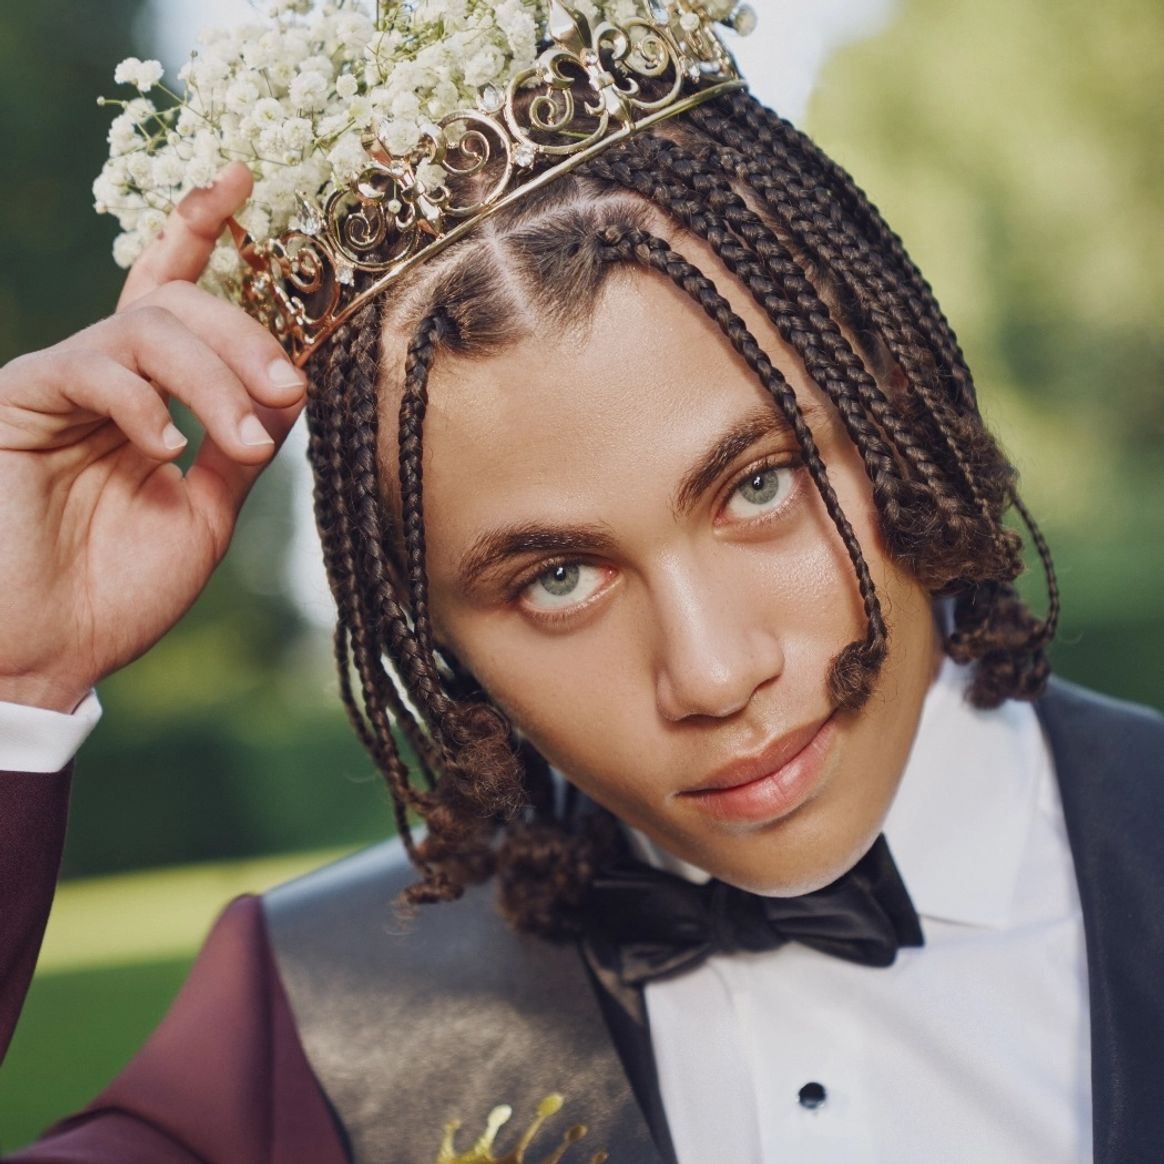 Closeup image of a prom suit with flower crown, black bow tie, tuxedo shirt for prom & maroon tuxedo.